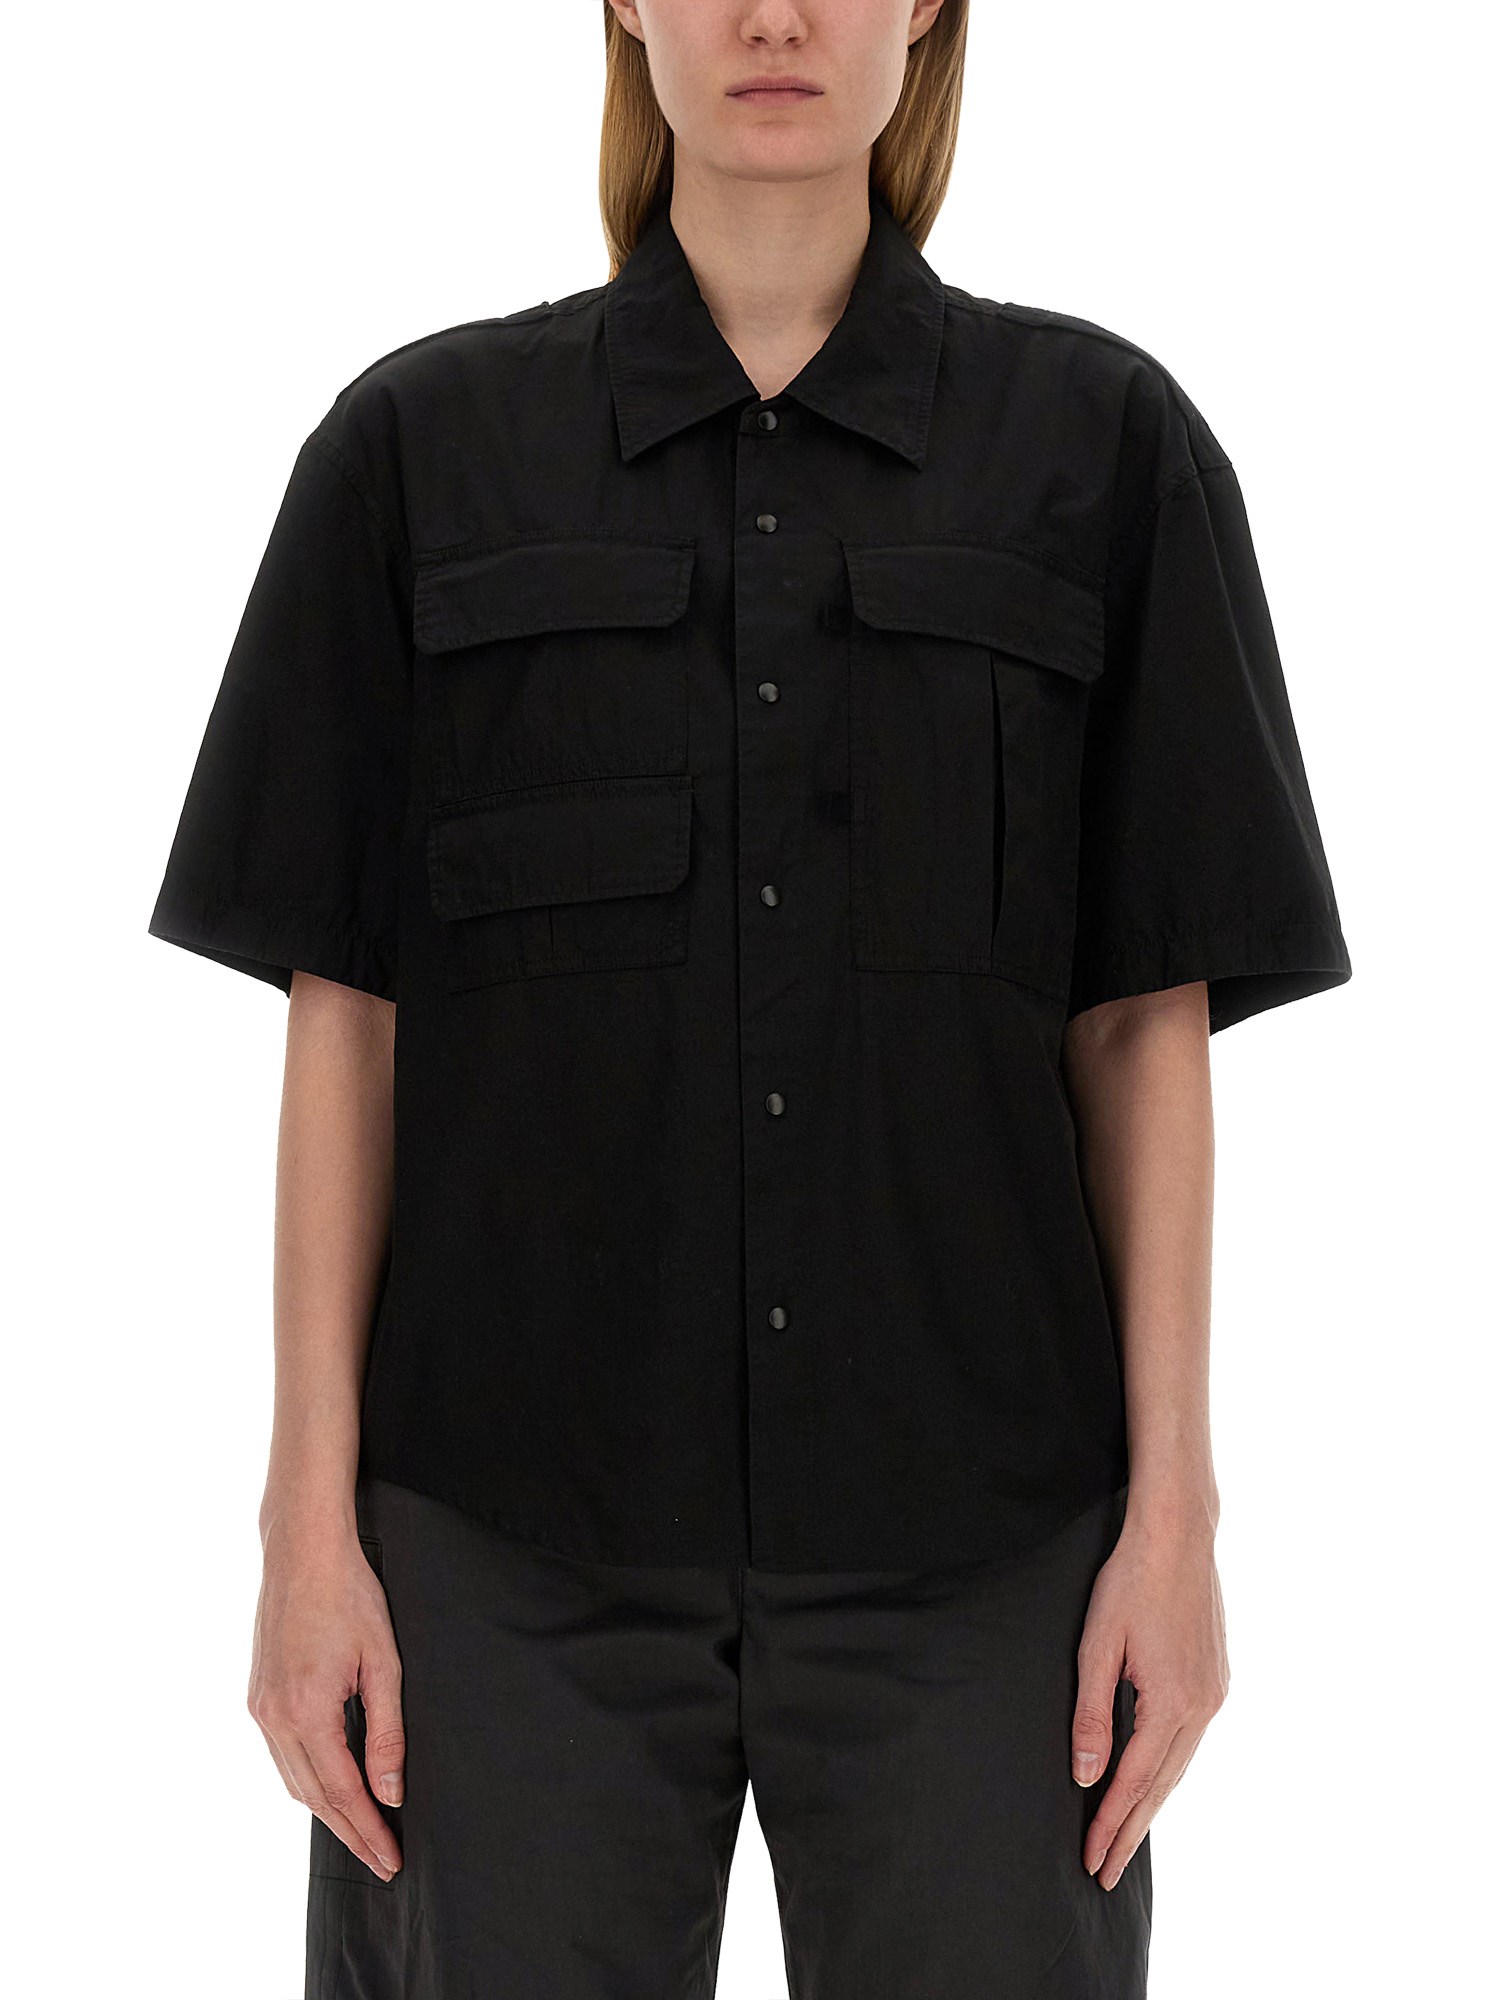 Lemaire lemaire "reporter" shirt